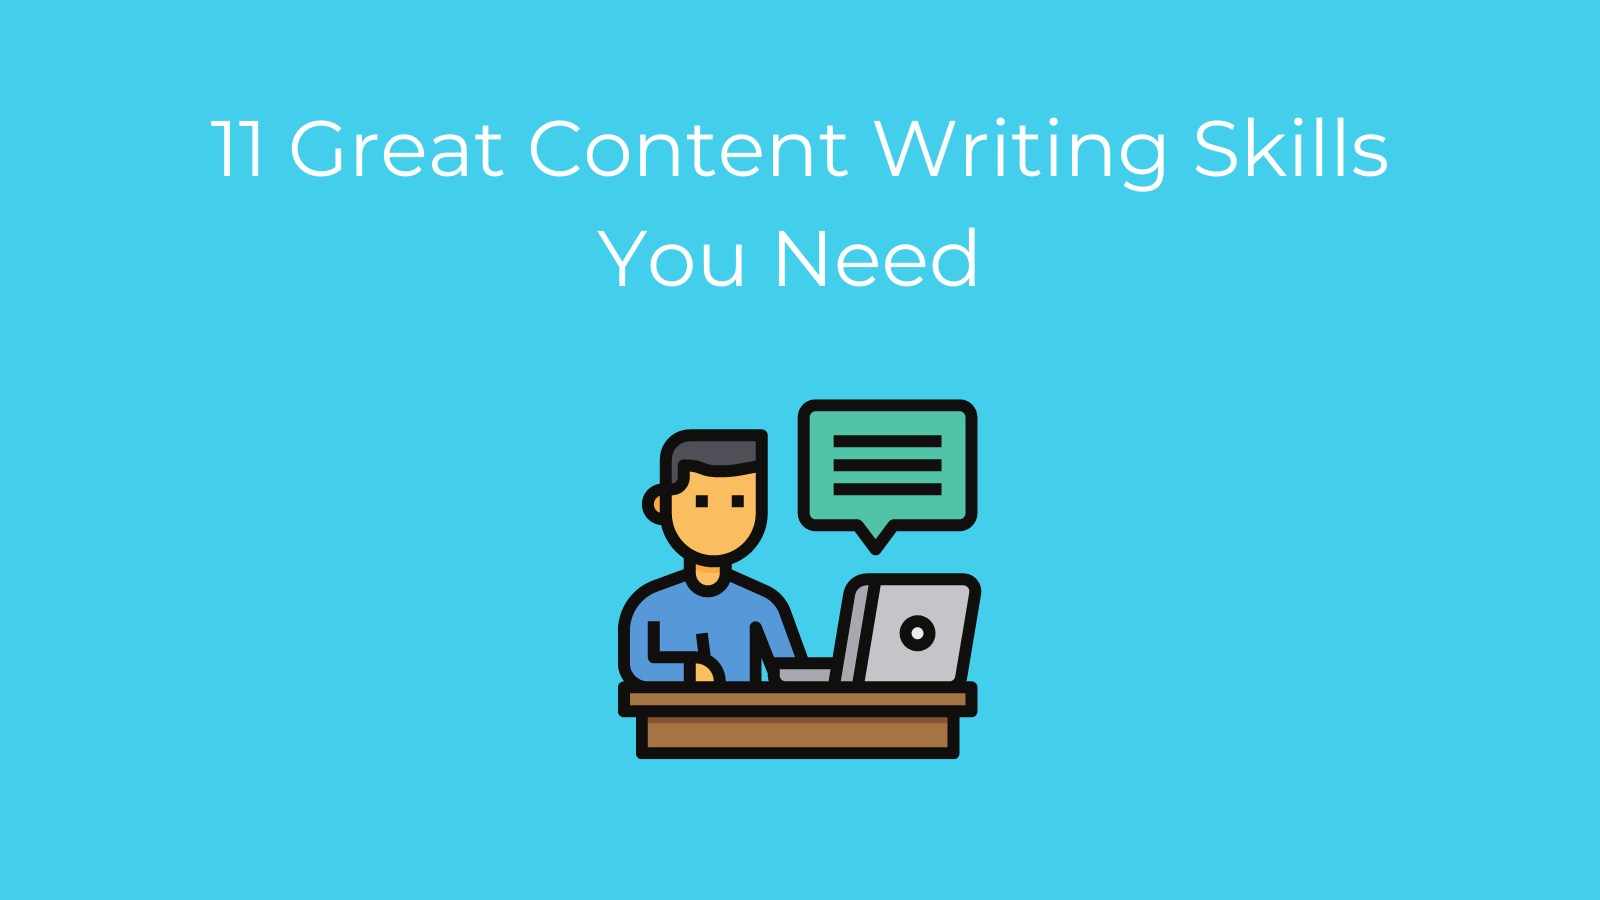 11 Great Content Writing Skills You Need